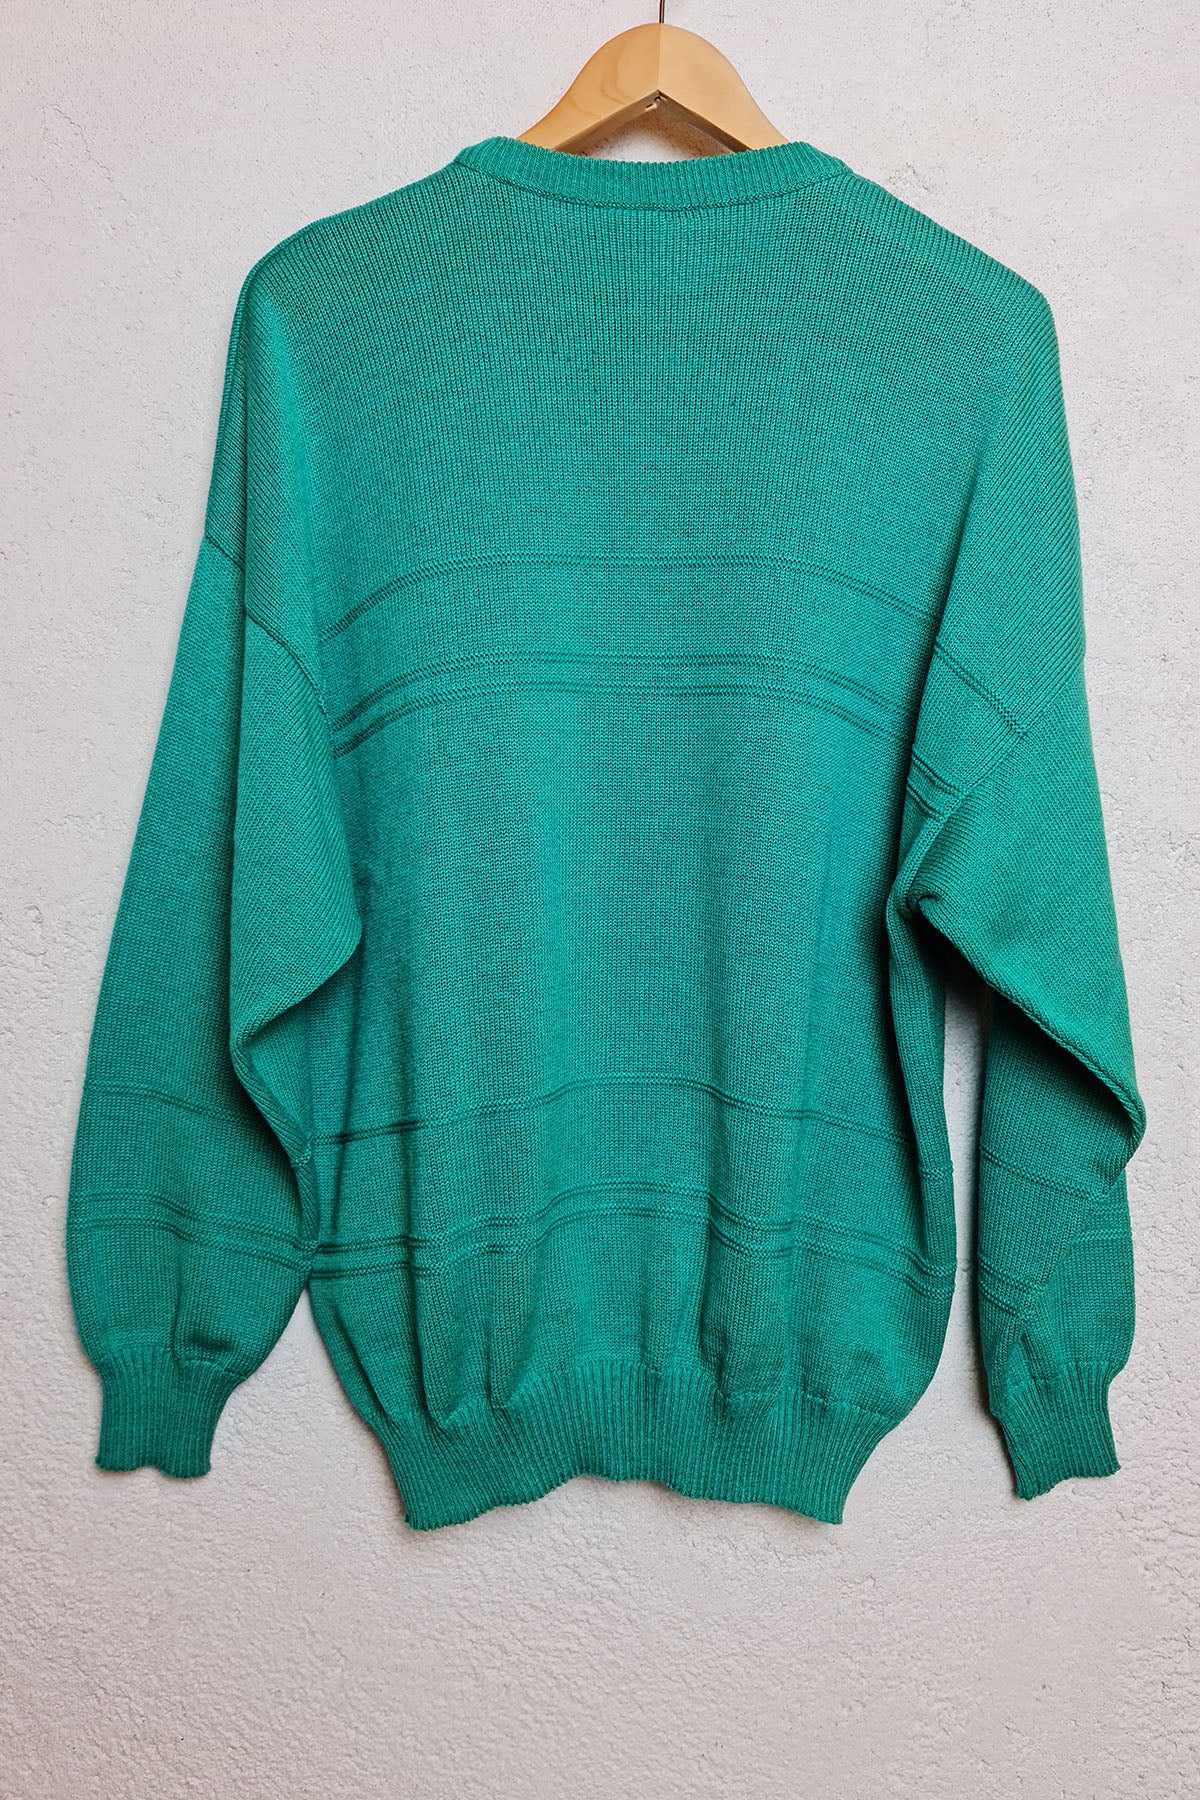 Bright Turquoise Vintage Pullover